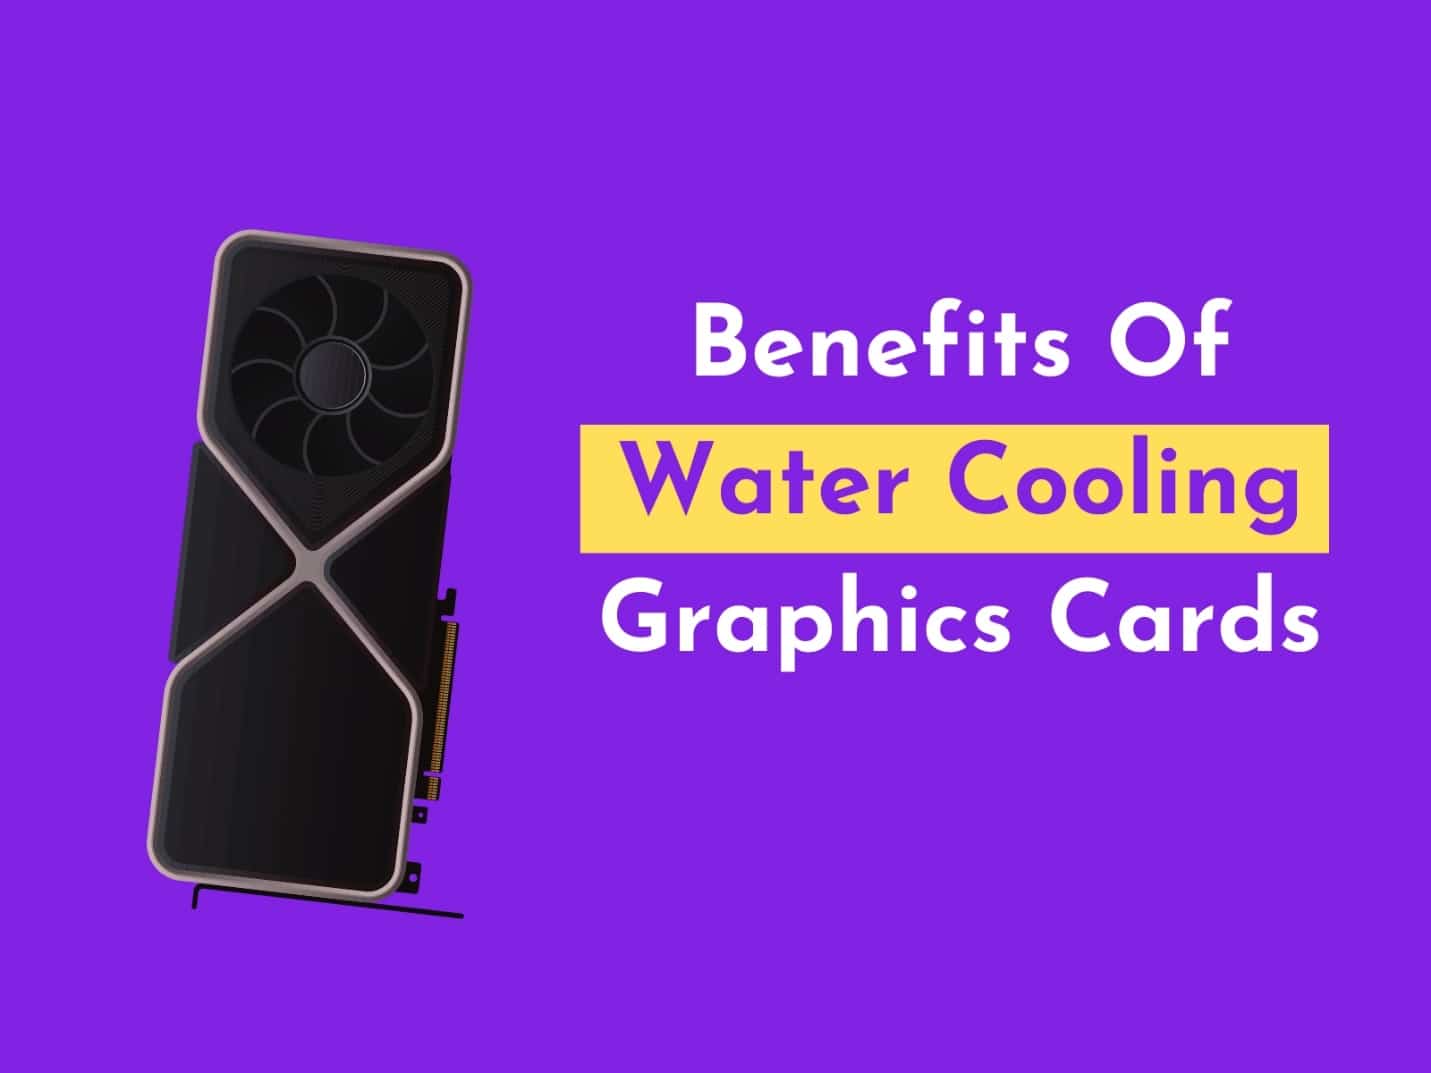 C:\Users\Mohsin\Downloads\What is thre process of Cooler\Benefits Of Water Cooling Graphics Cards.jpg